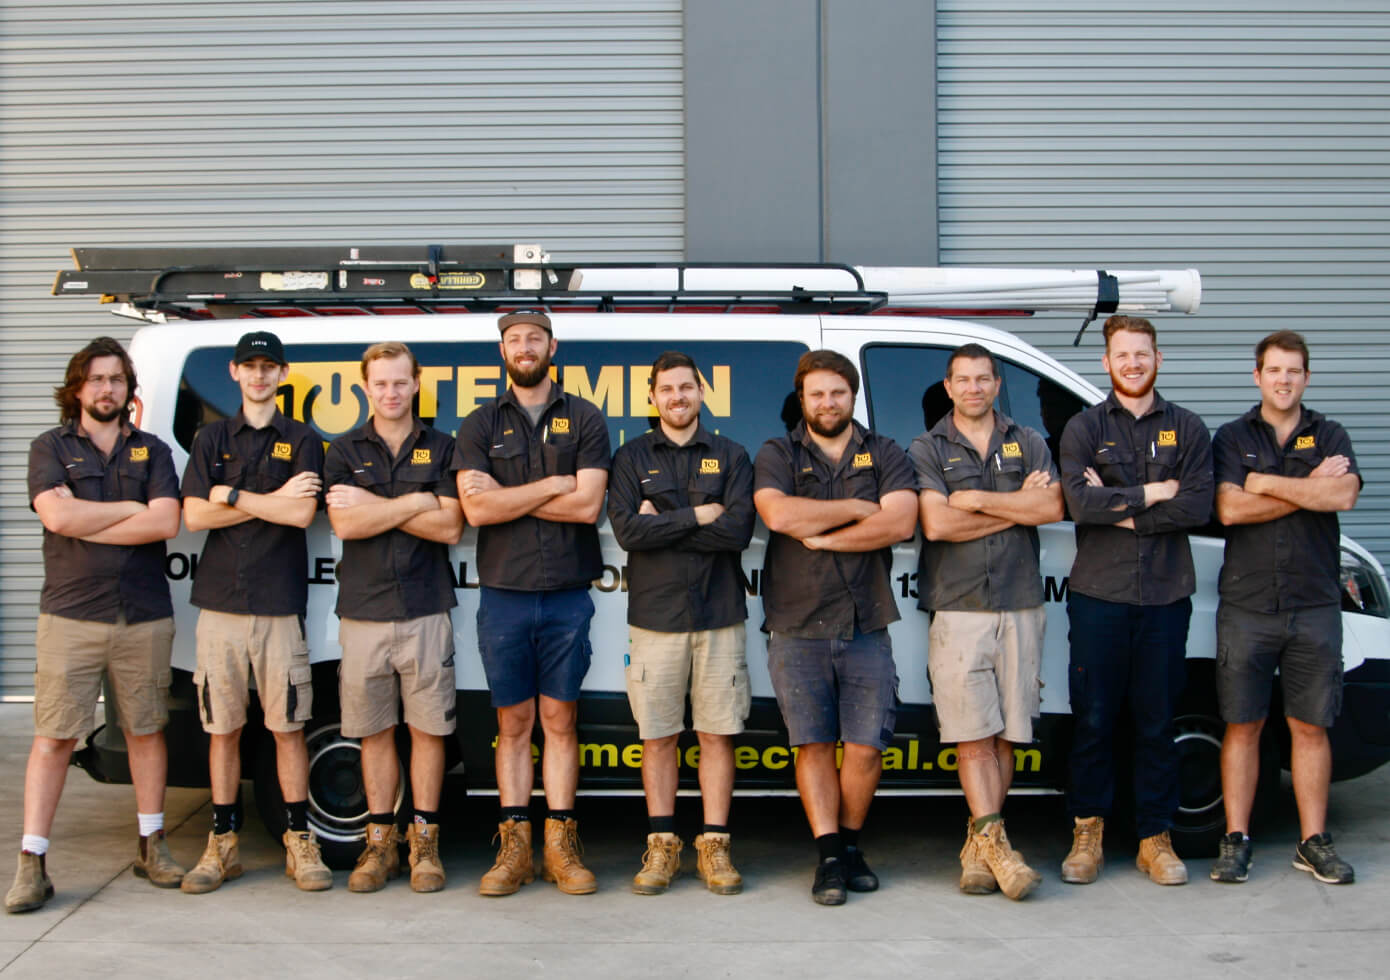 The Tenmen Electrical team of solar installers standing in front of the company van on the Sunshine Coast.